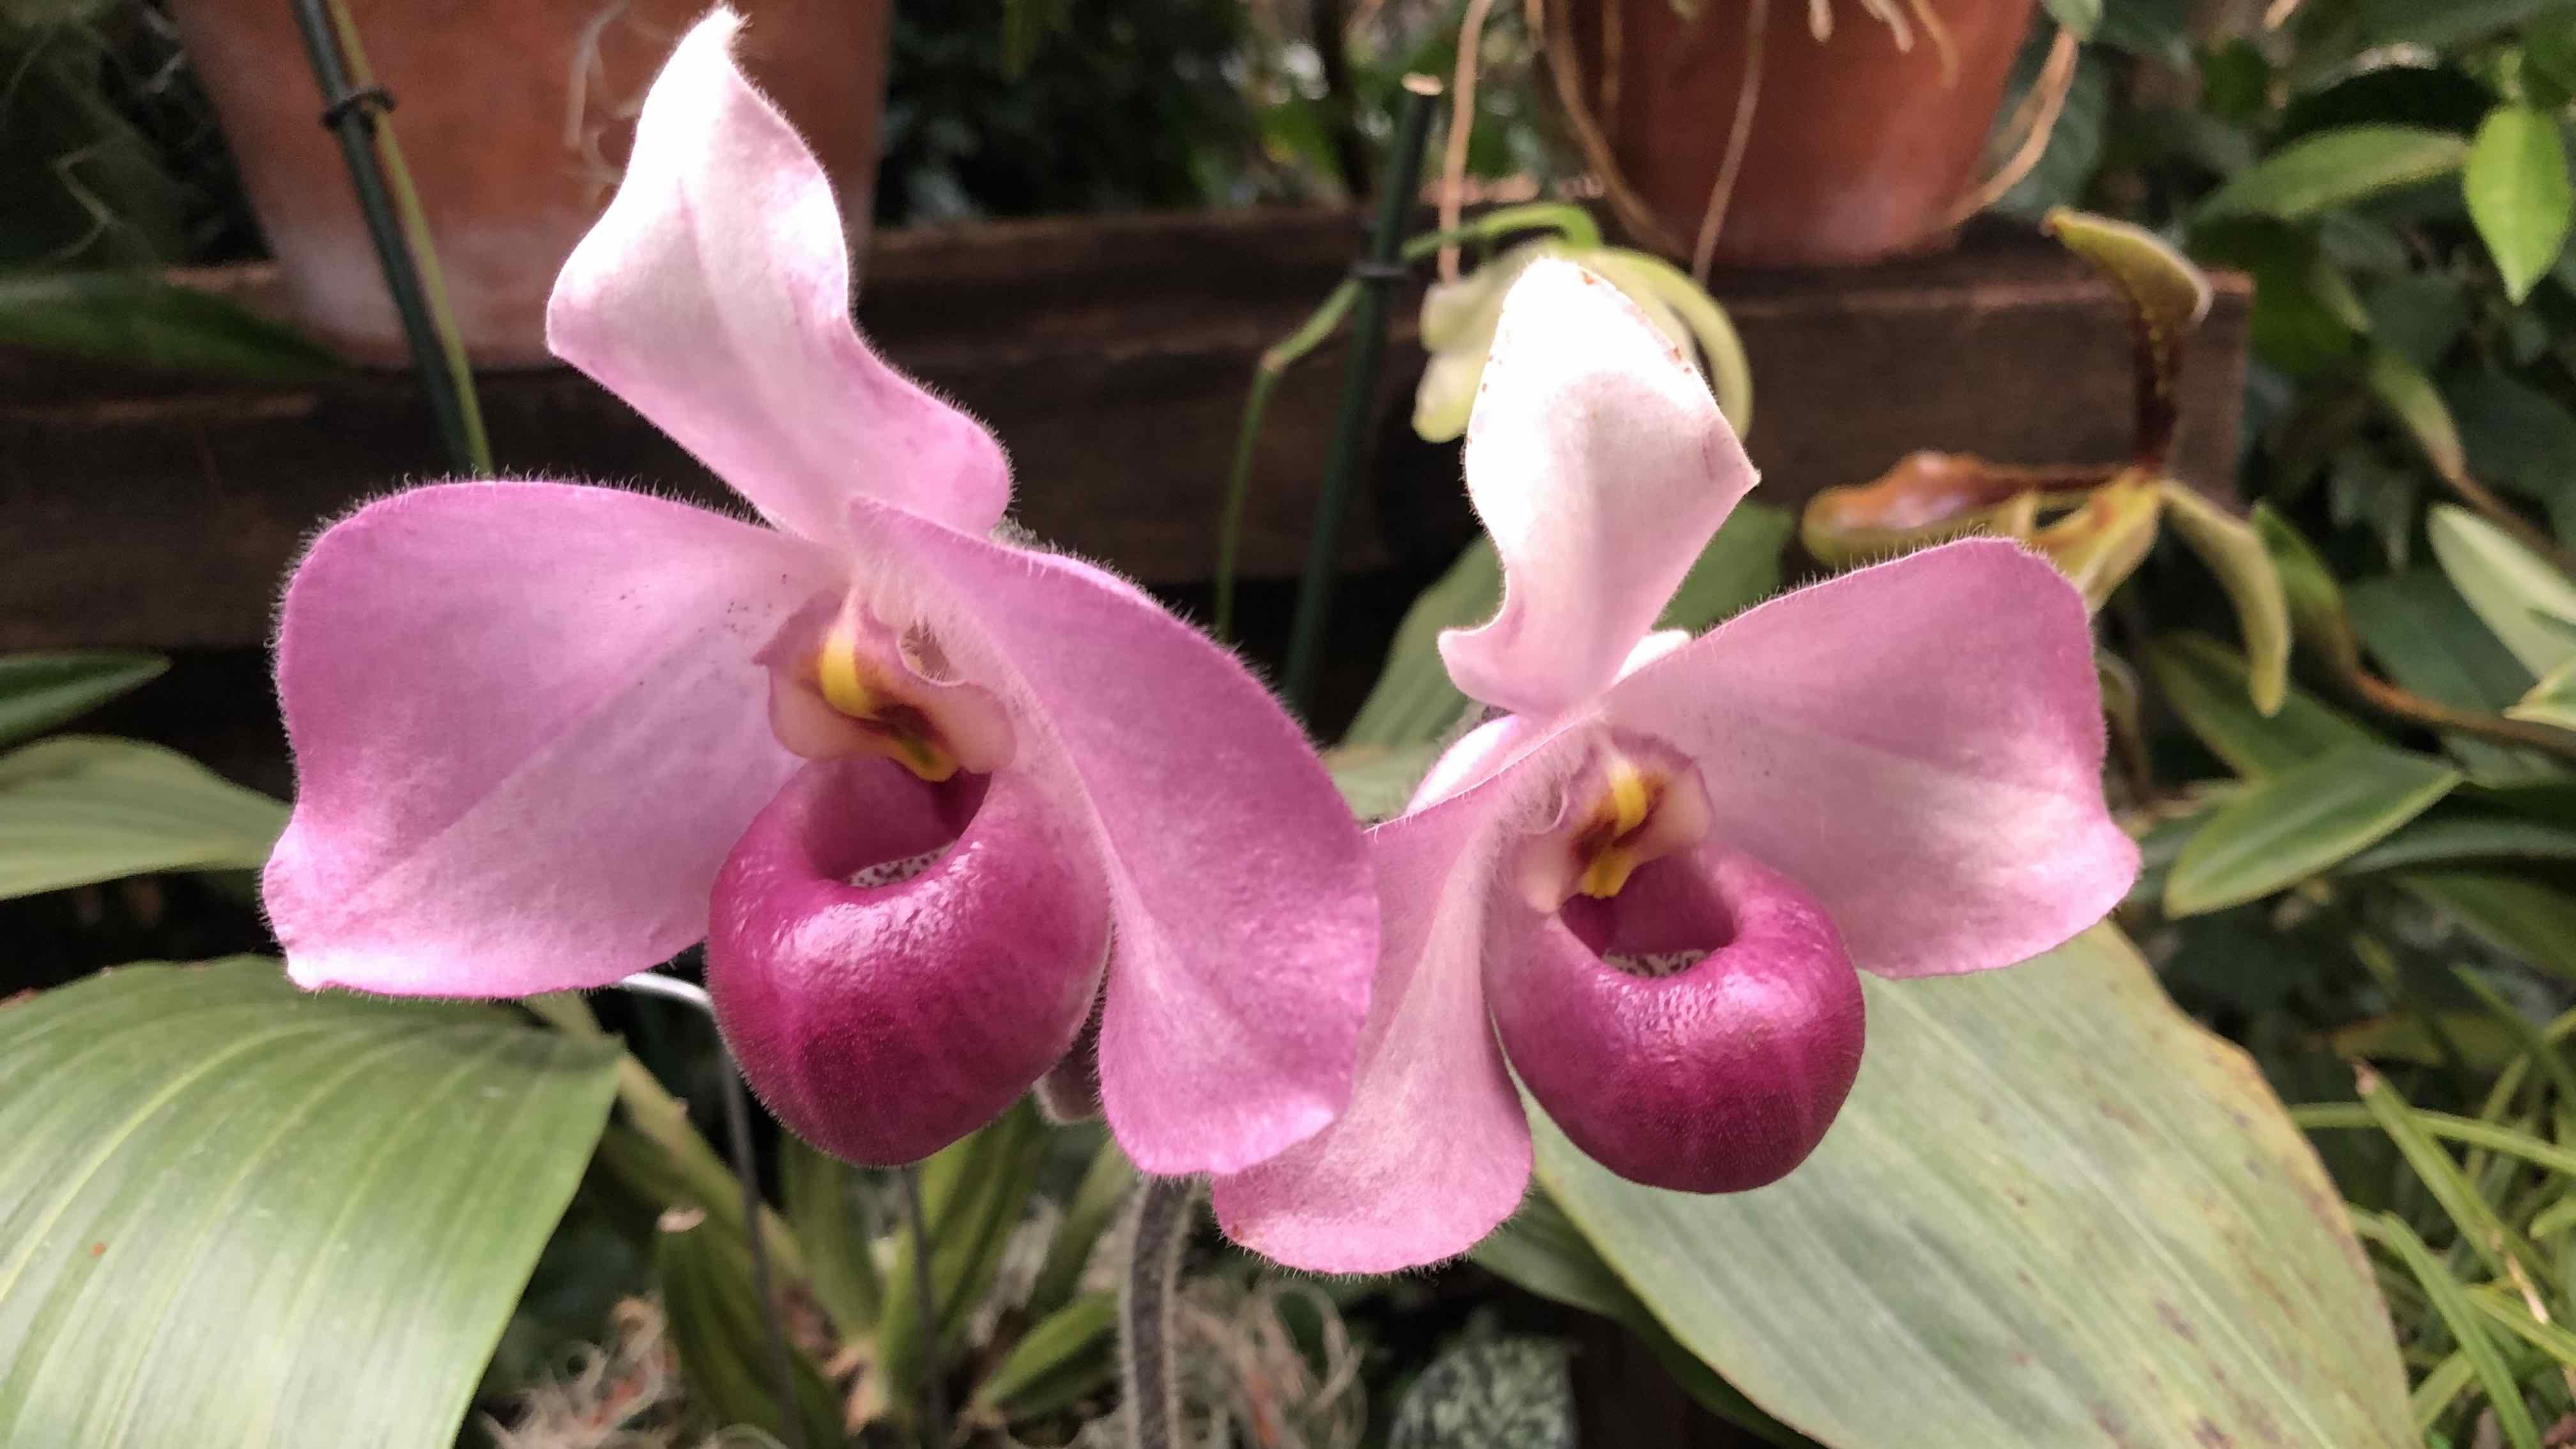 Enchanting slipper orchids from the Orchidarium have made their way into the orchid show. (Patty Wetli / WTTW News)